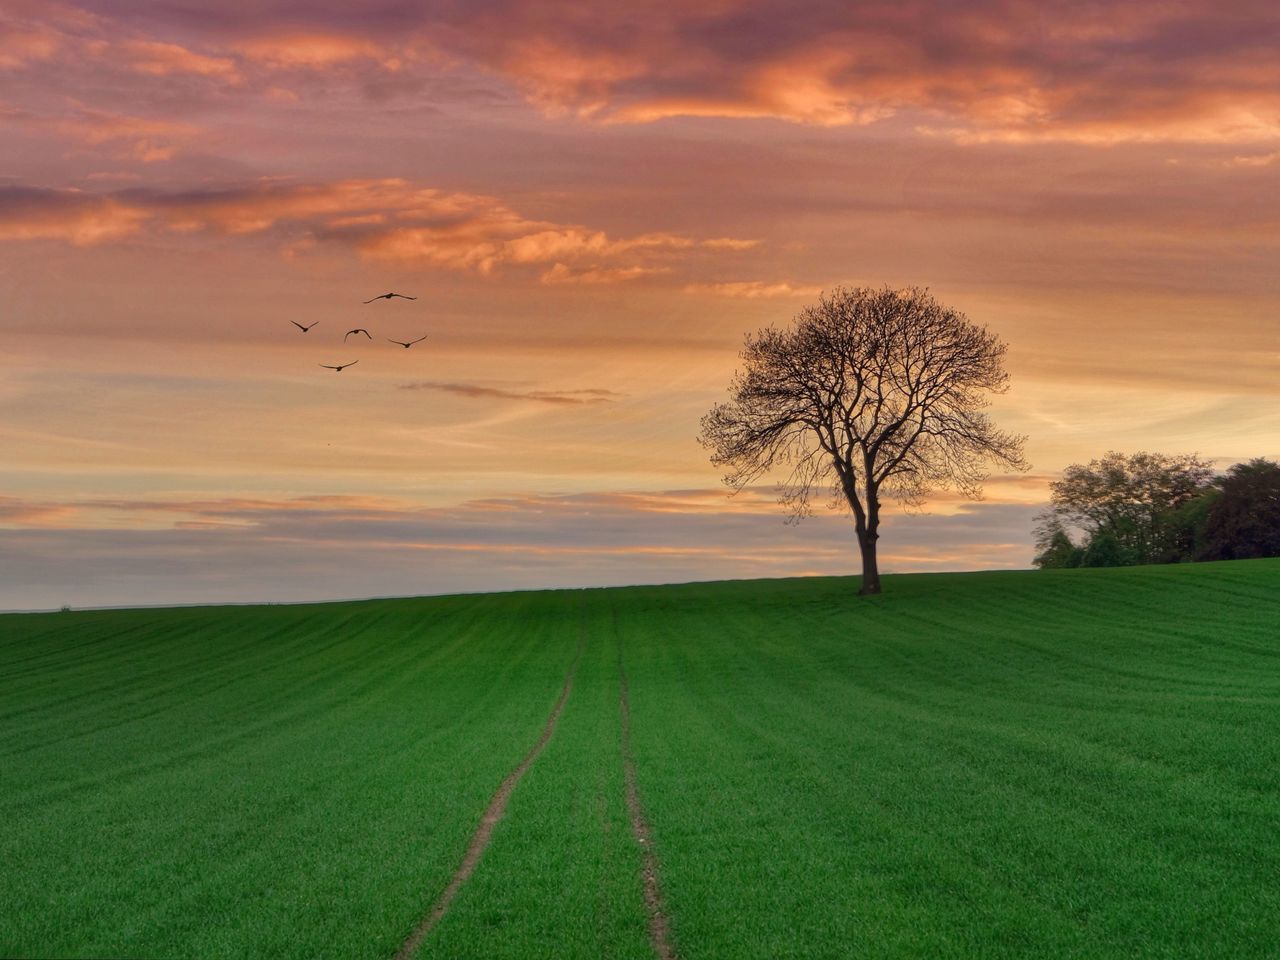 field, sunset, agriculture, landscape, beauty in nature, rural scene, tranquil scene, tree, nature, bare tree, scenics, grass, tranquility, green color, no people, outdoors, growth, sky, day